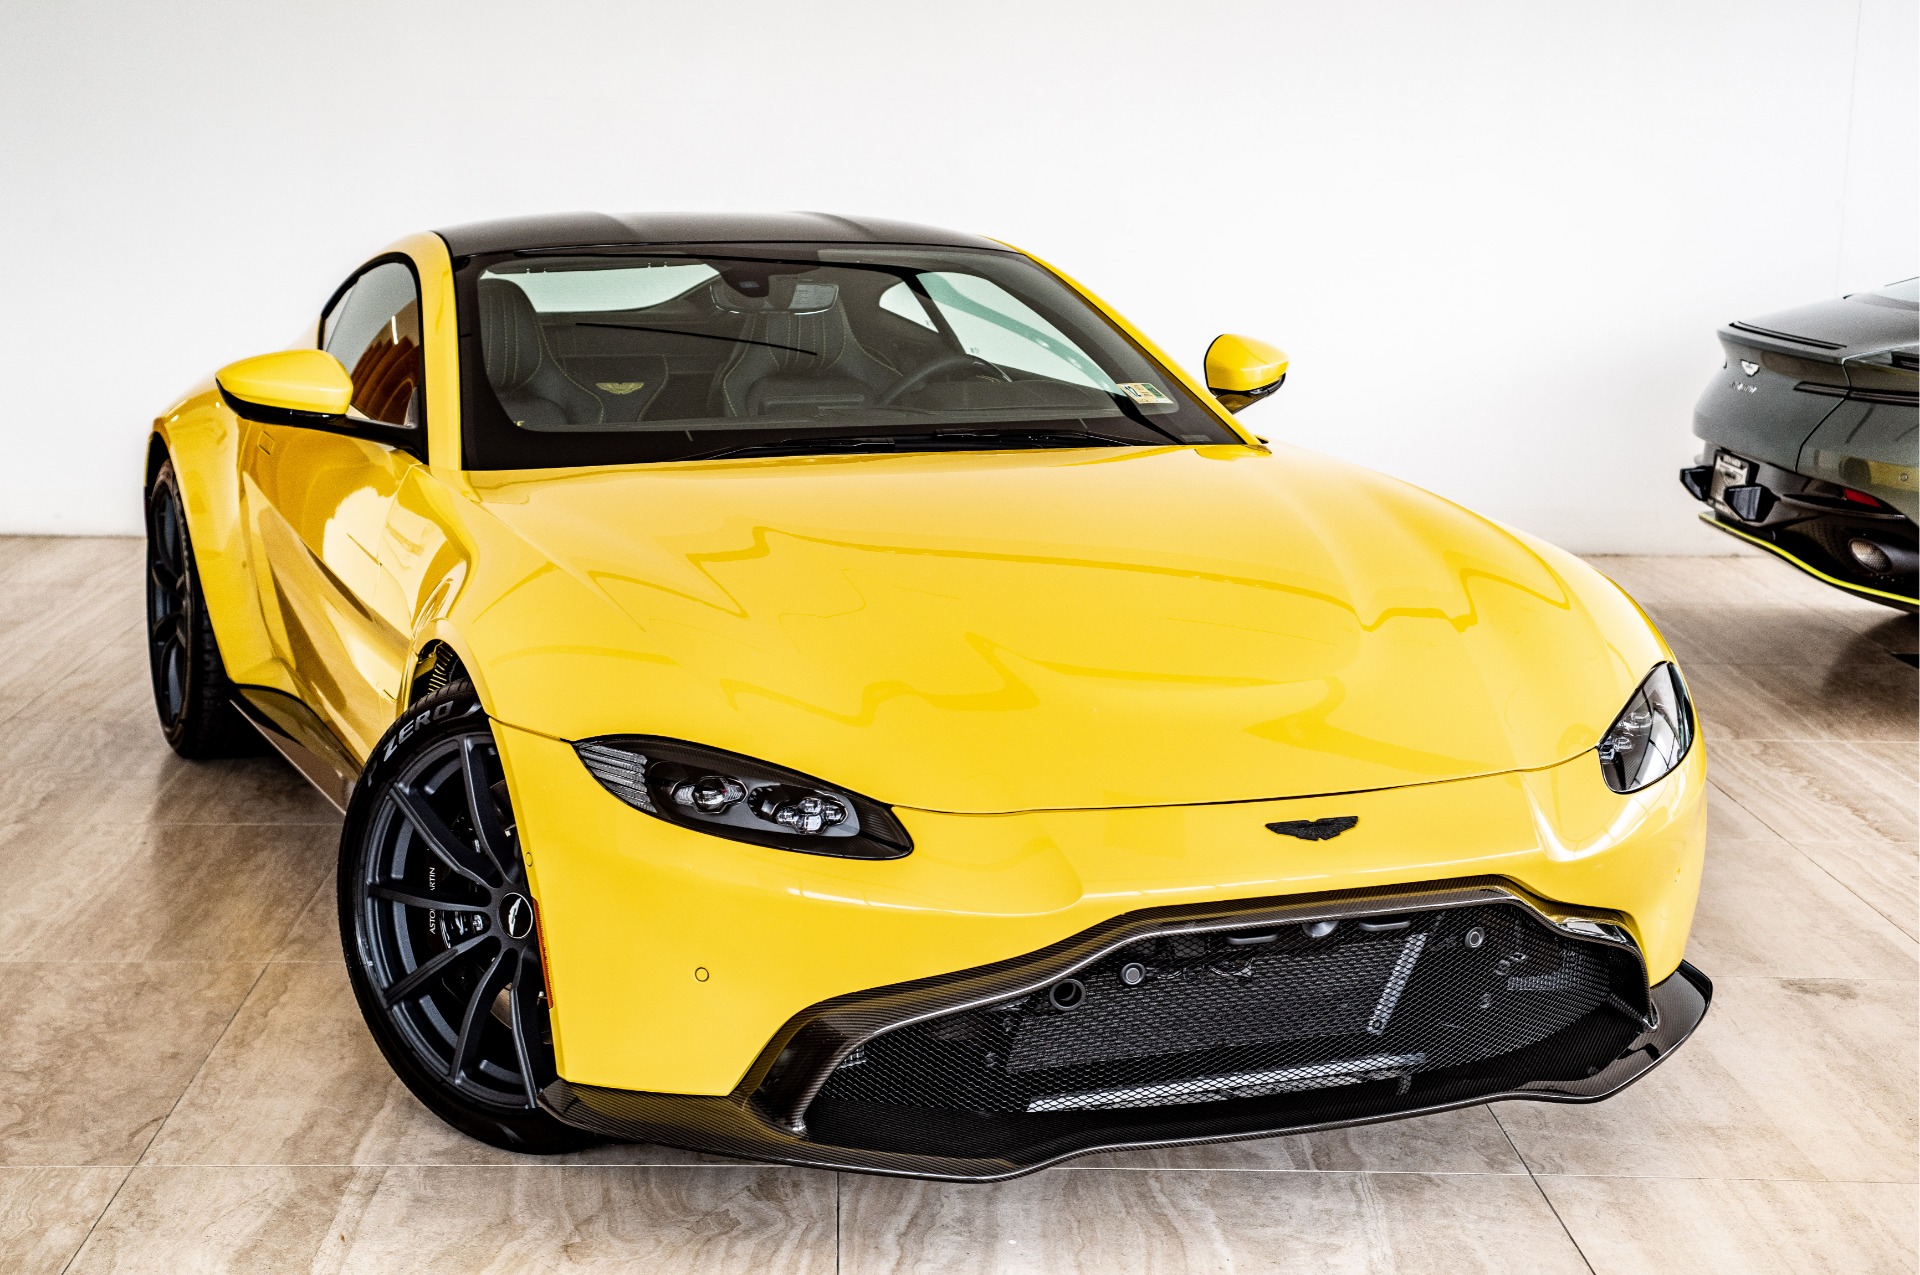 Unlock The Power Of Possibilities With The 2019 Aston Martin Vantage